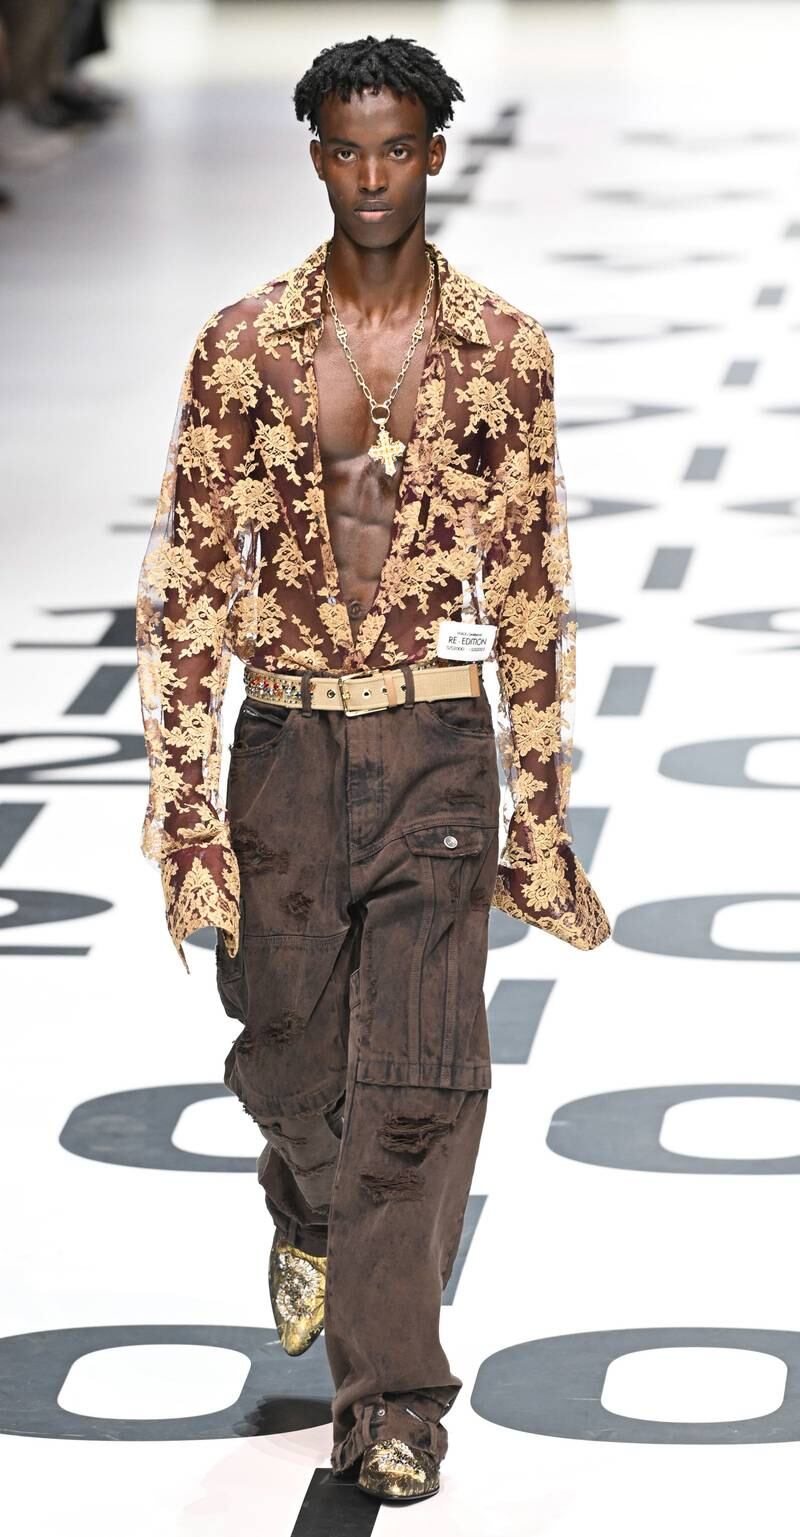 Baggy 1990s-style trousers and lace shirts feature in the Dolce & Gabbana spring/summer 2023 menswear collection. Photo: EPA